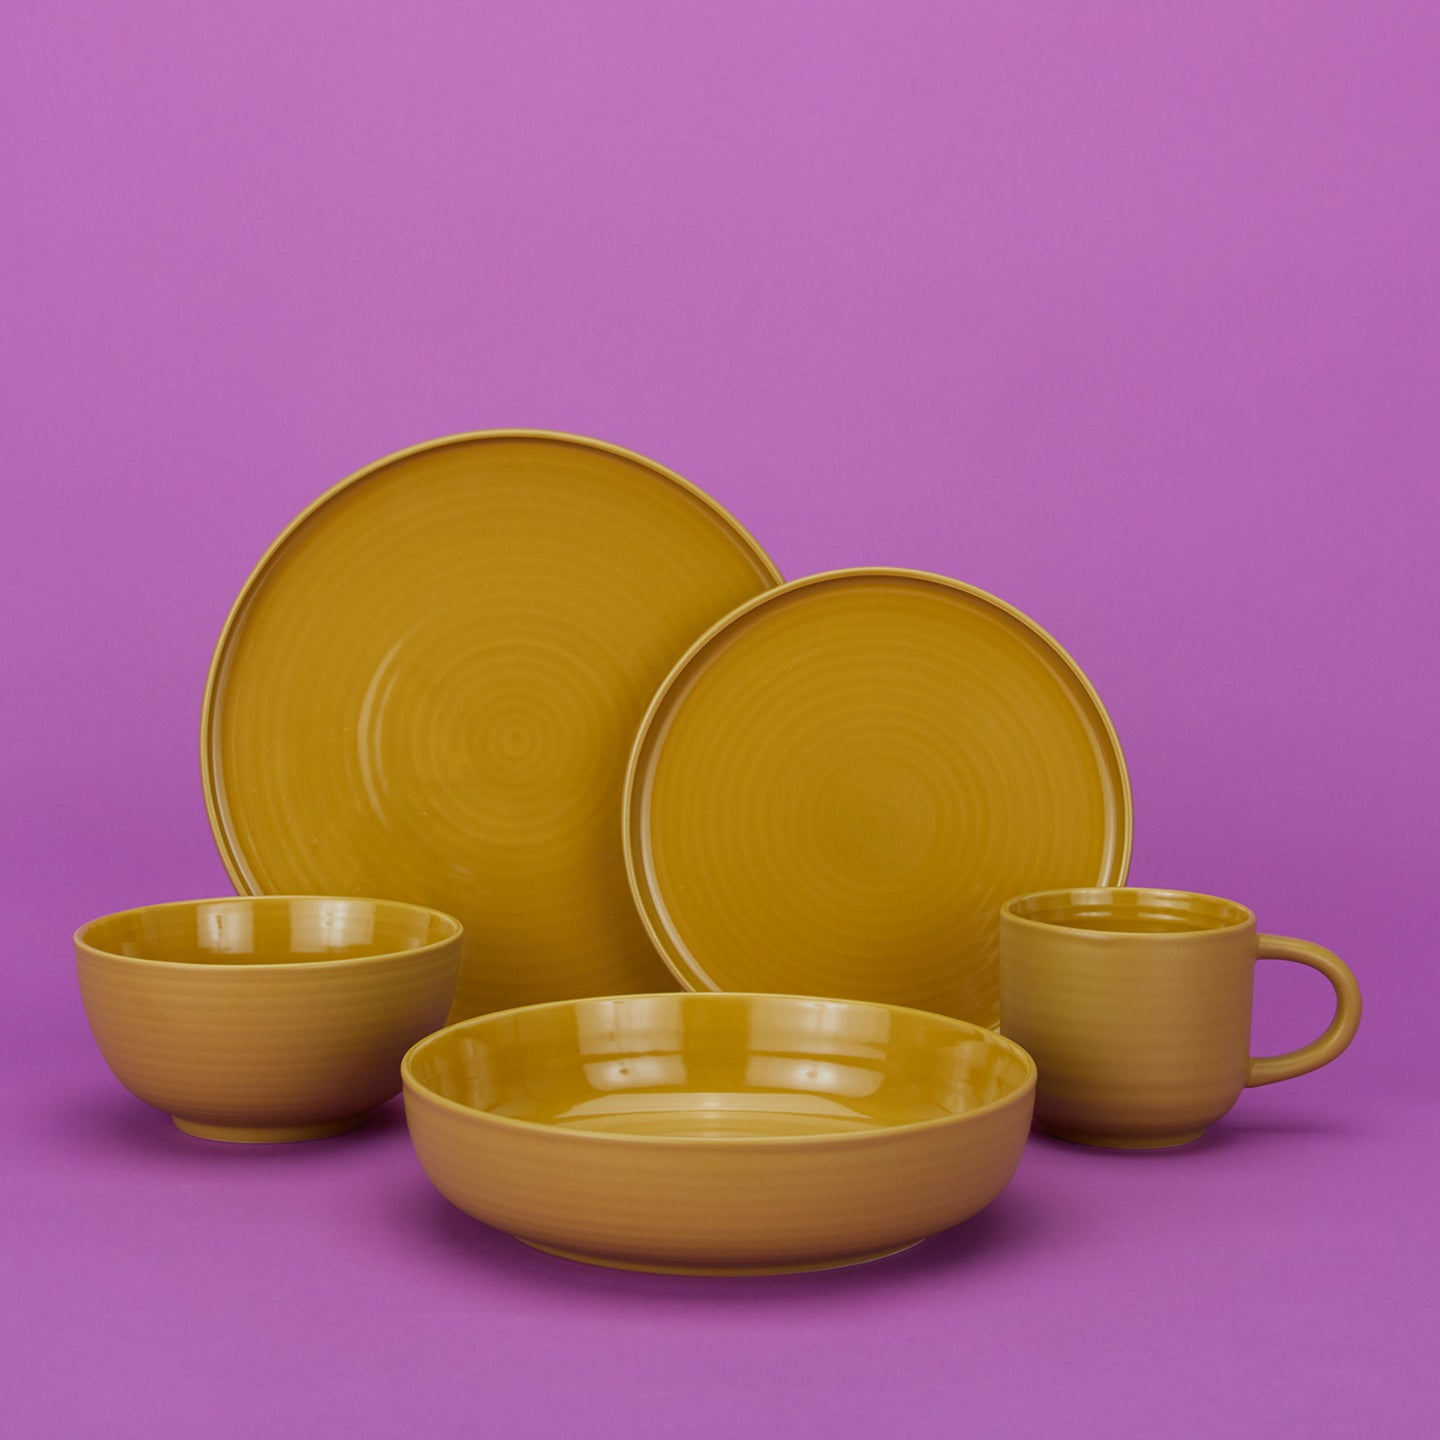 Group of Essential Dinnerware in Mustard including low bowl, large bowl, salad plate, dinner plate and mug.